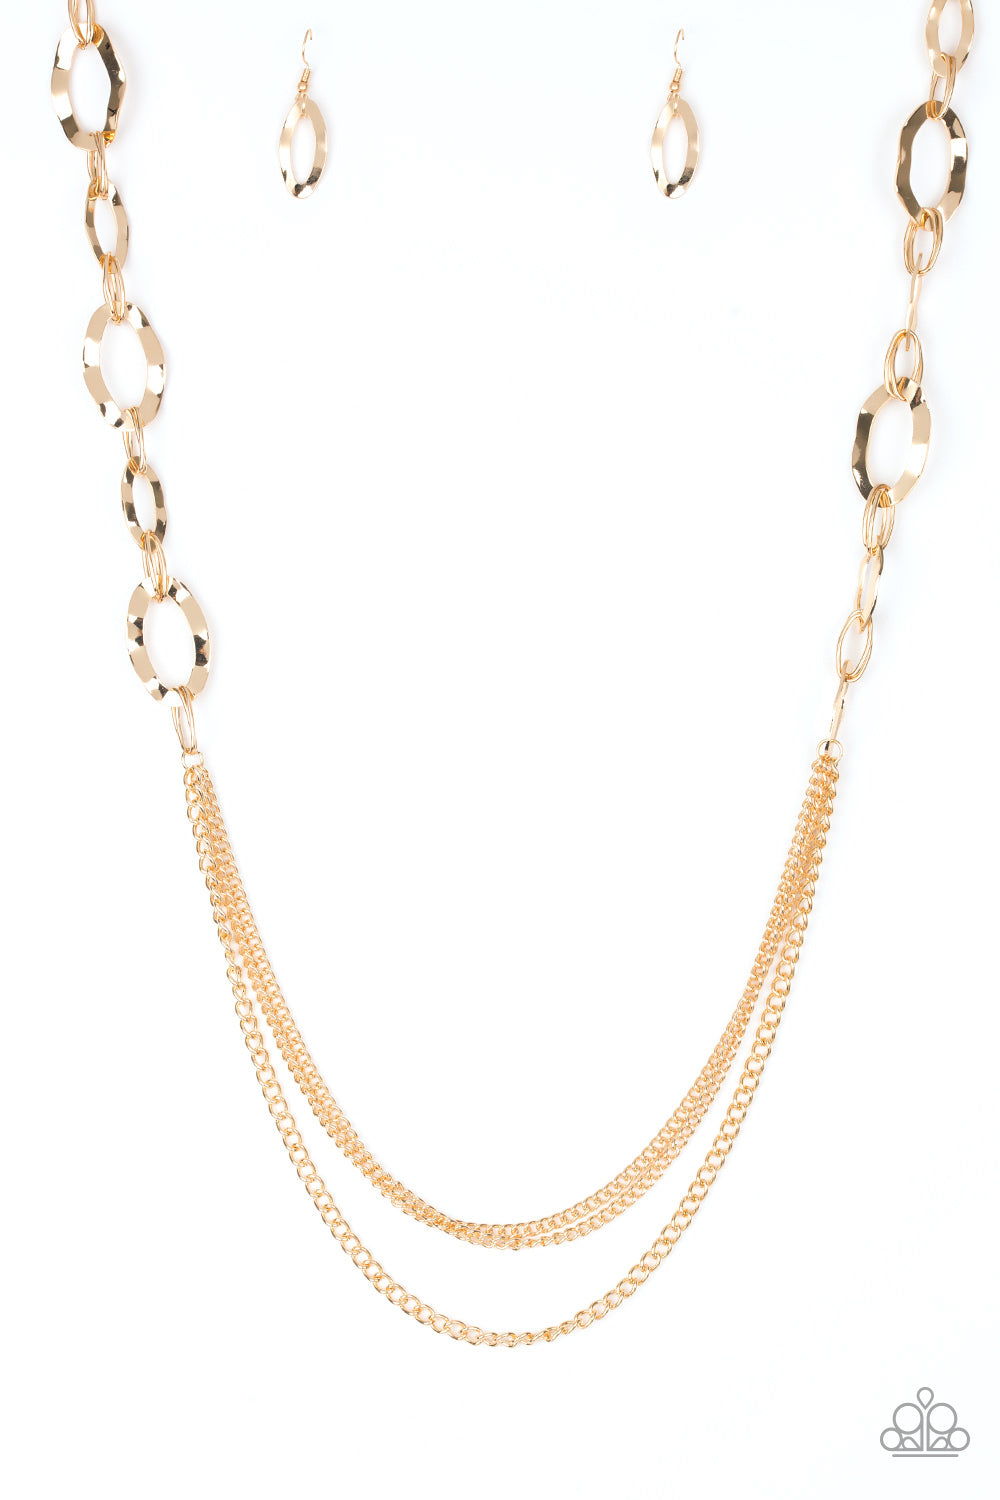 Paparazzi Accessories - Street Beat #N627 - Gold Necklace